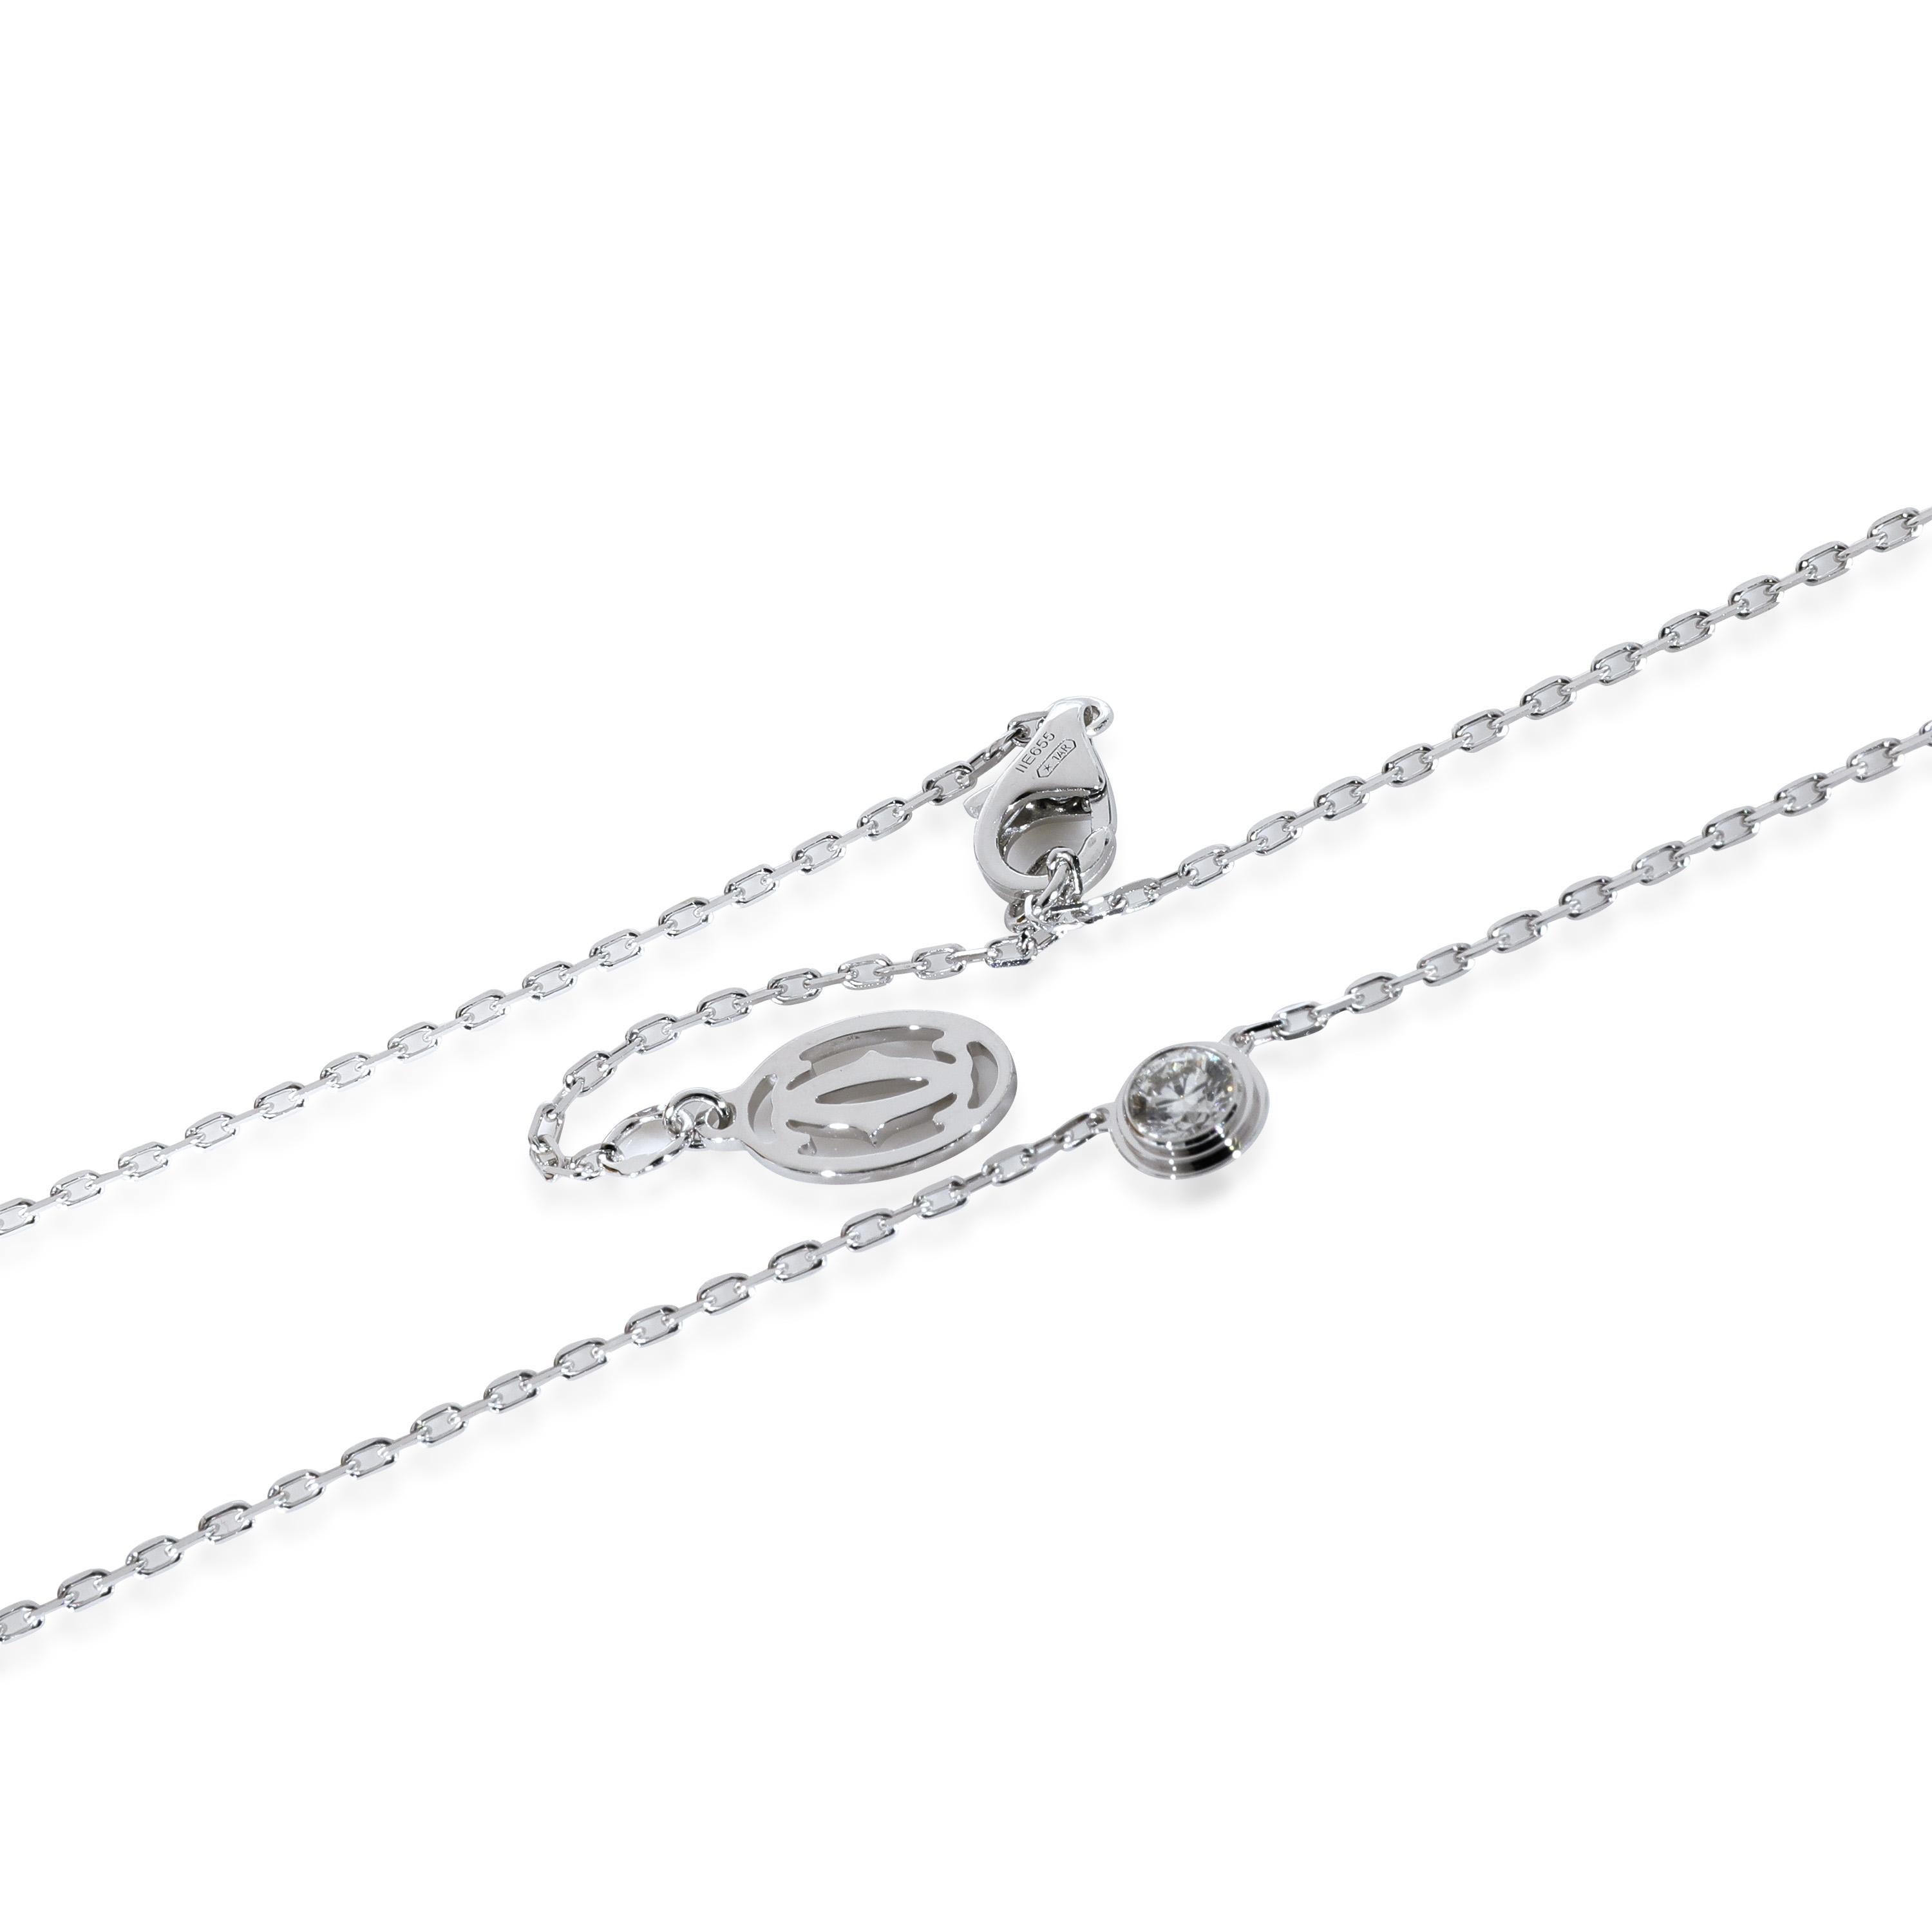 Cartier D Amour Diamond Solitaire Necklace in 18k White Gold 0.18 CTW

PRIMARY DETAILS
SKU: 130222
Listing Title: Cartier D Amour Diamond Solitaire Necklace in 18k White Gold 0.18 CTW
Condition Description: Retails for 2380 USD. Large model. In